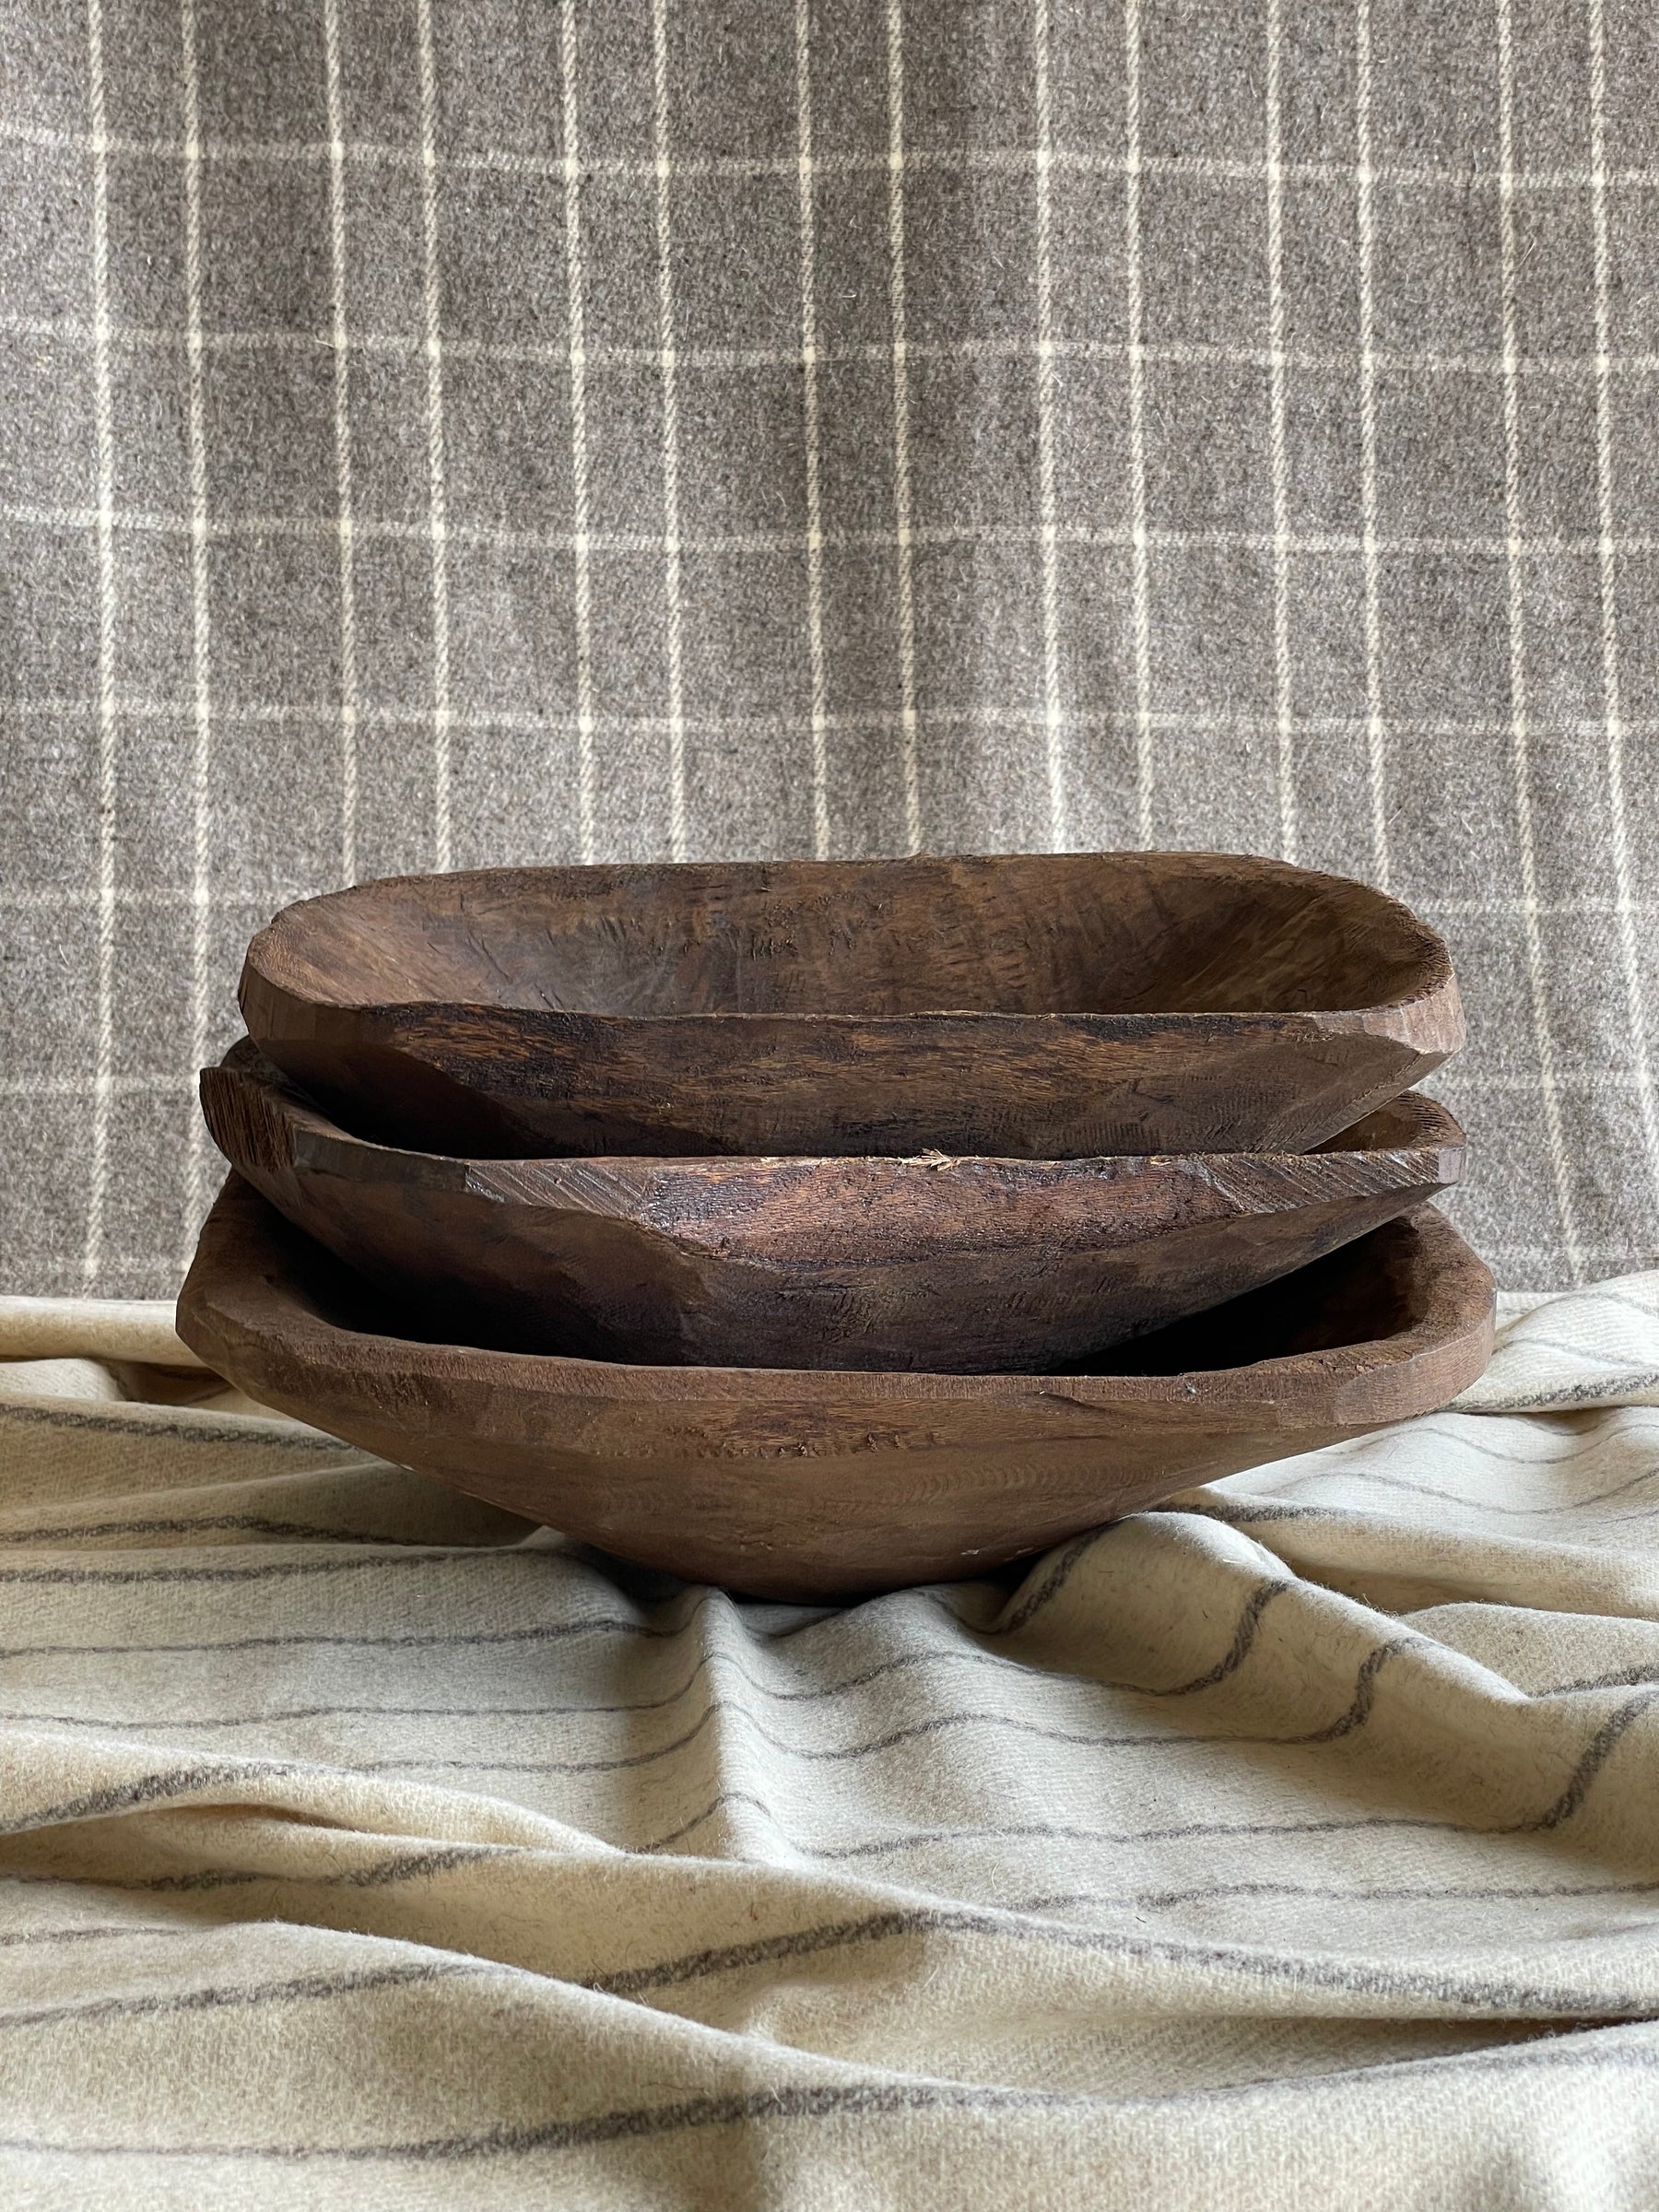 Vintage Hand Scooped Bowls